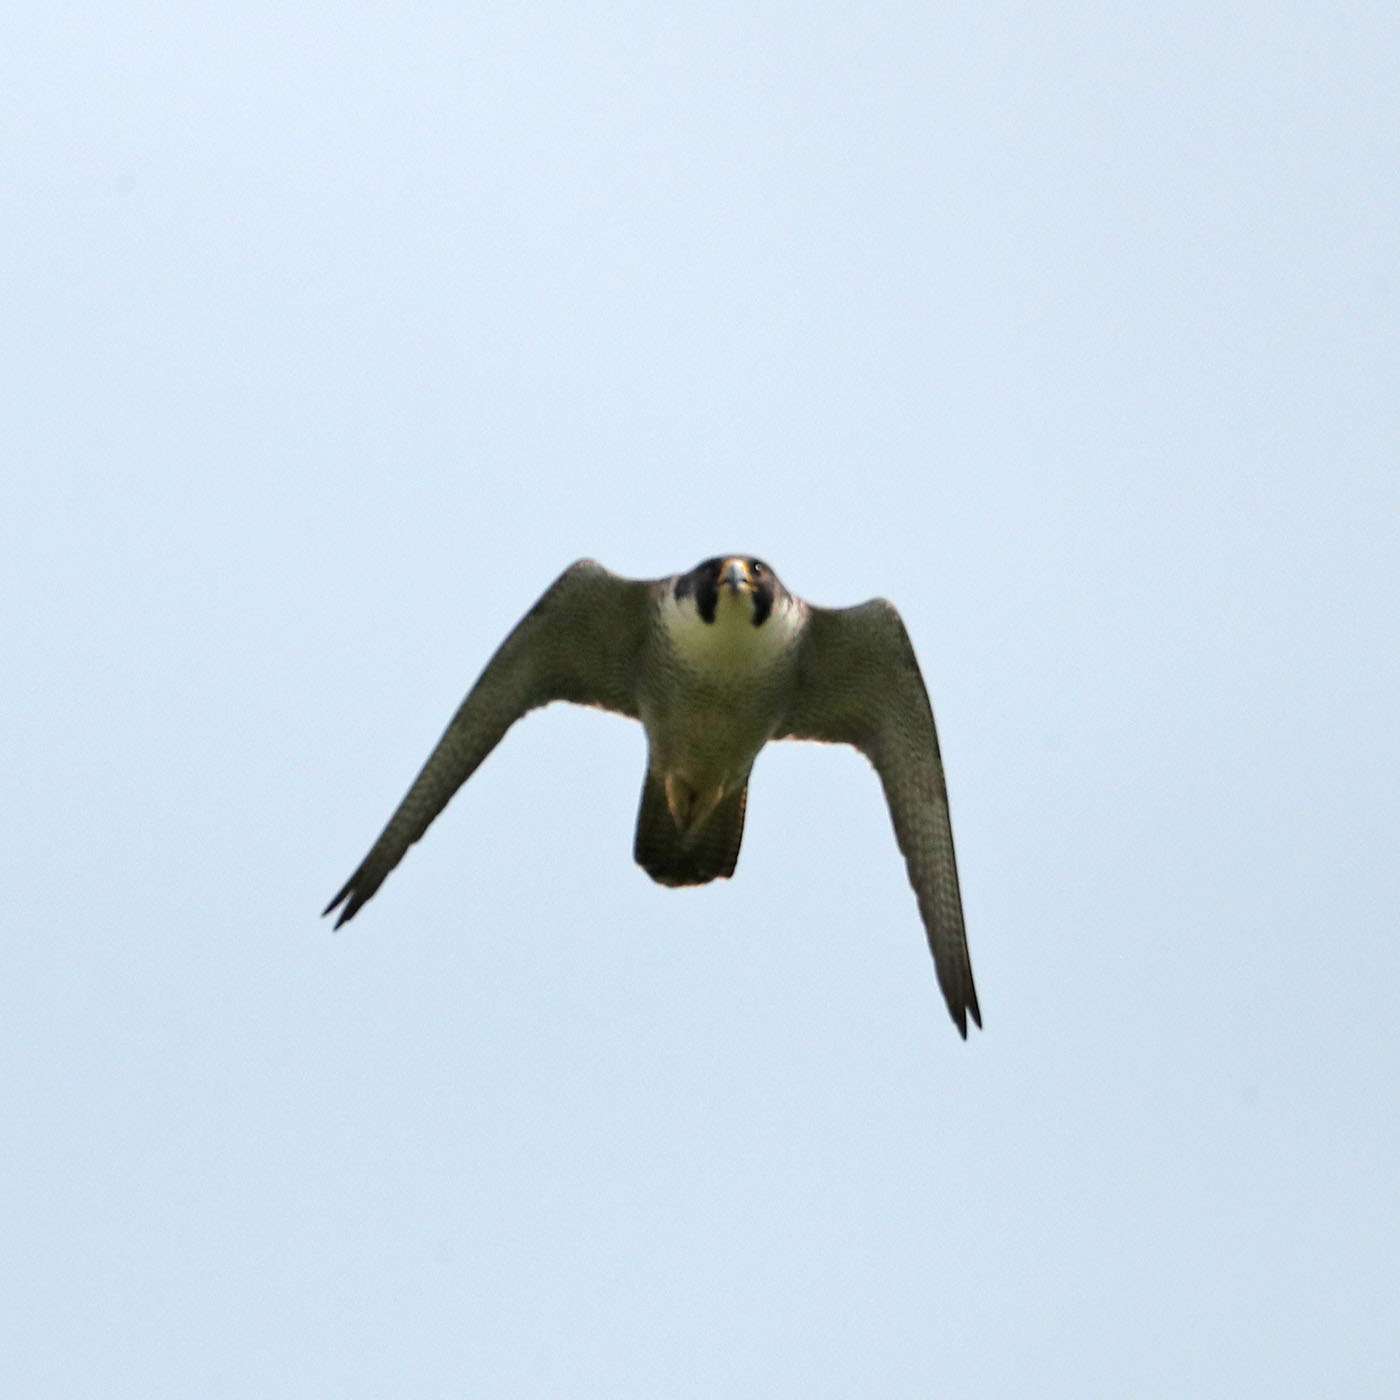 Peregrine by Steve Hopper at South Brent